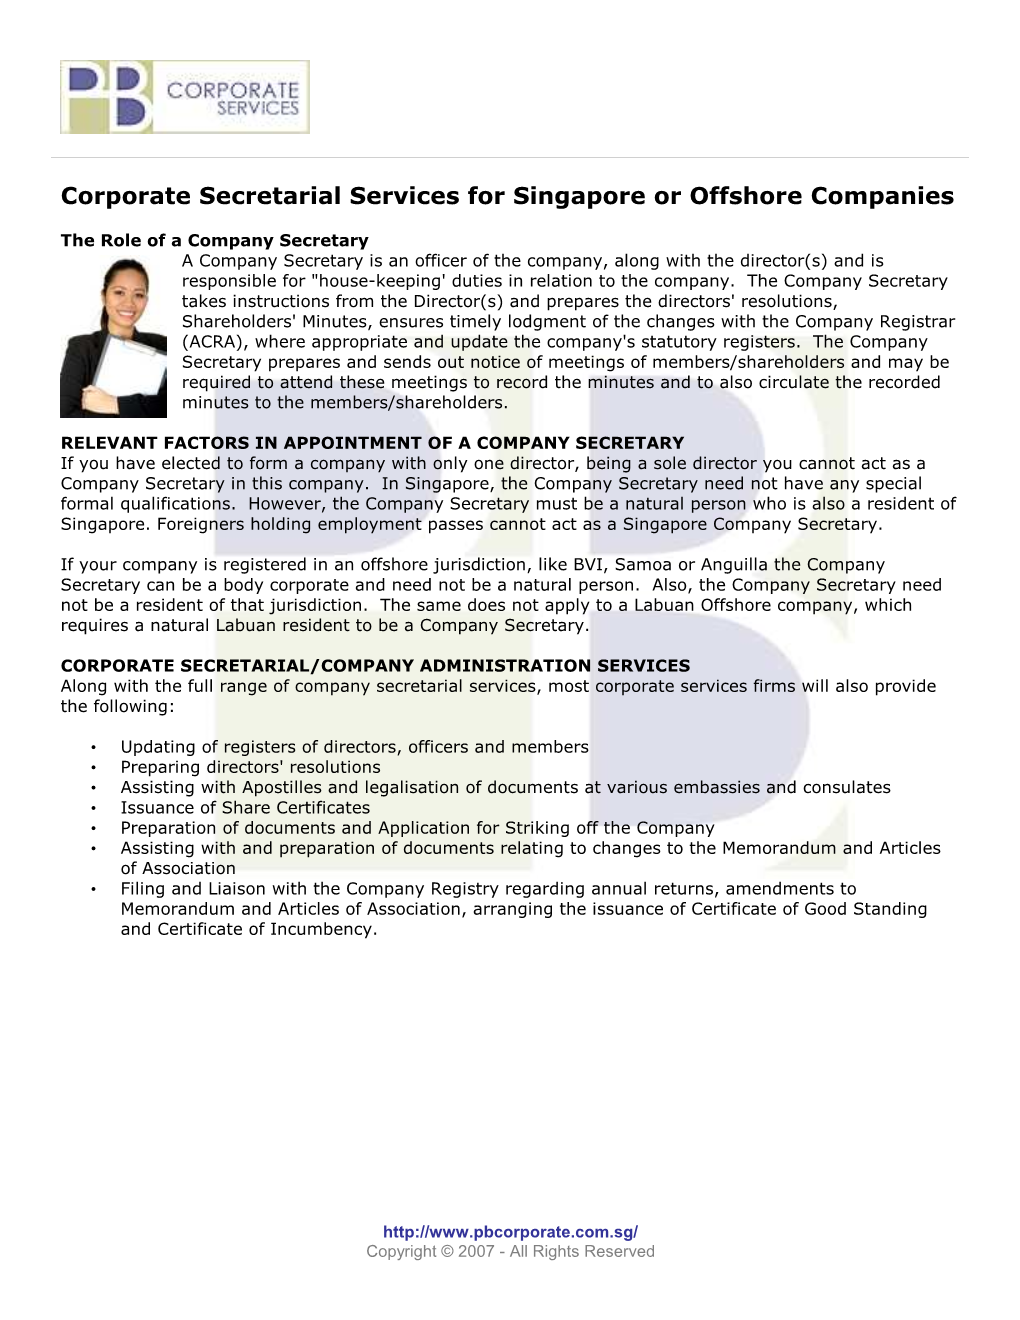 Corporate Secretarial Services for Singapore Or Offshore Companies